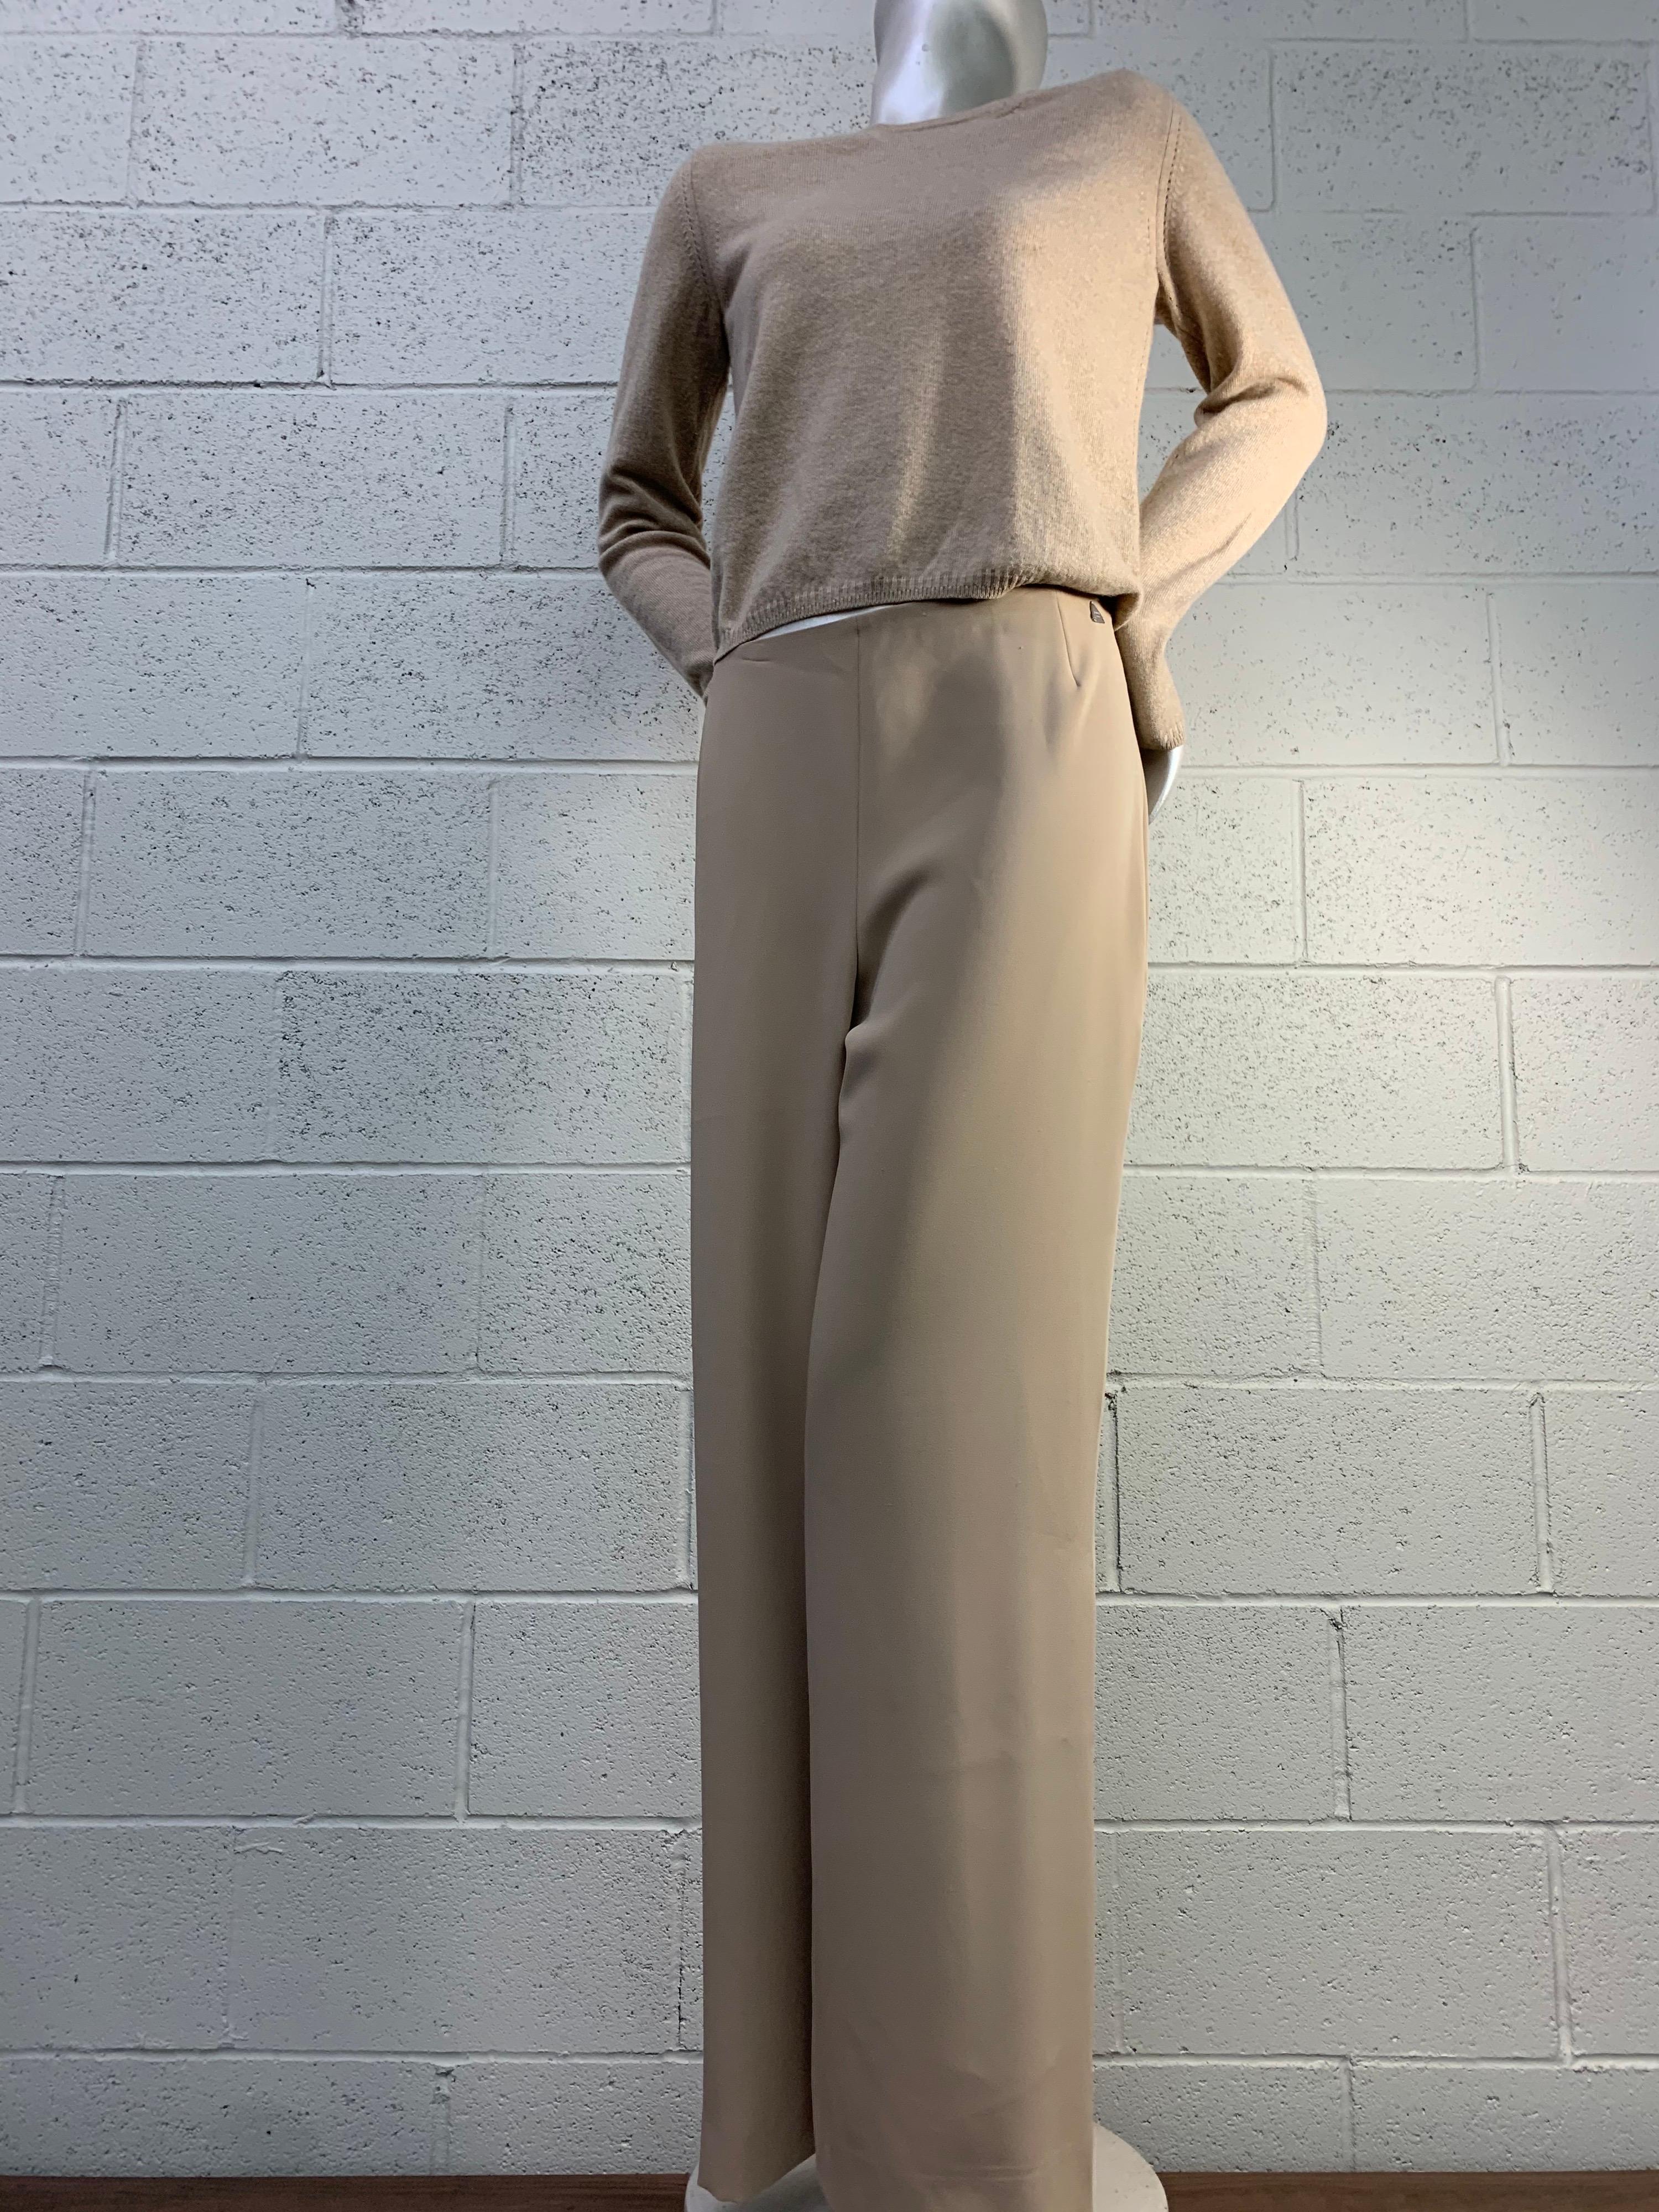 2000s Chanel Wide-Leg Flat Front Camel-Toned Trousers w/ Cashmere Pullover 8